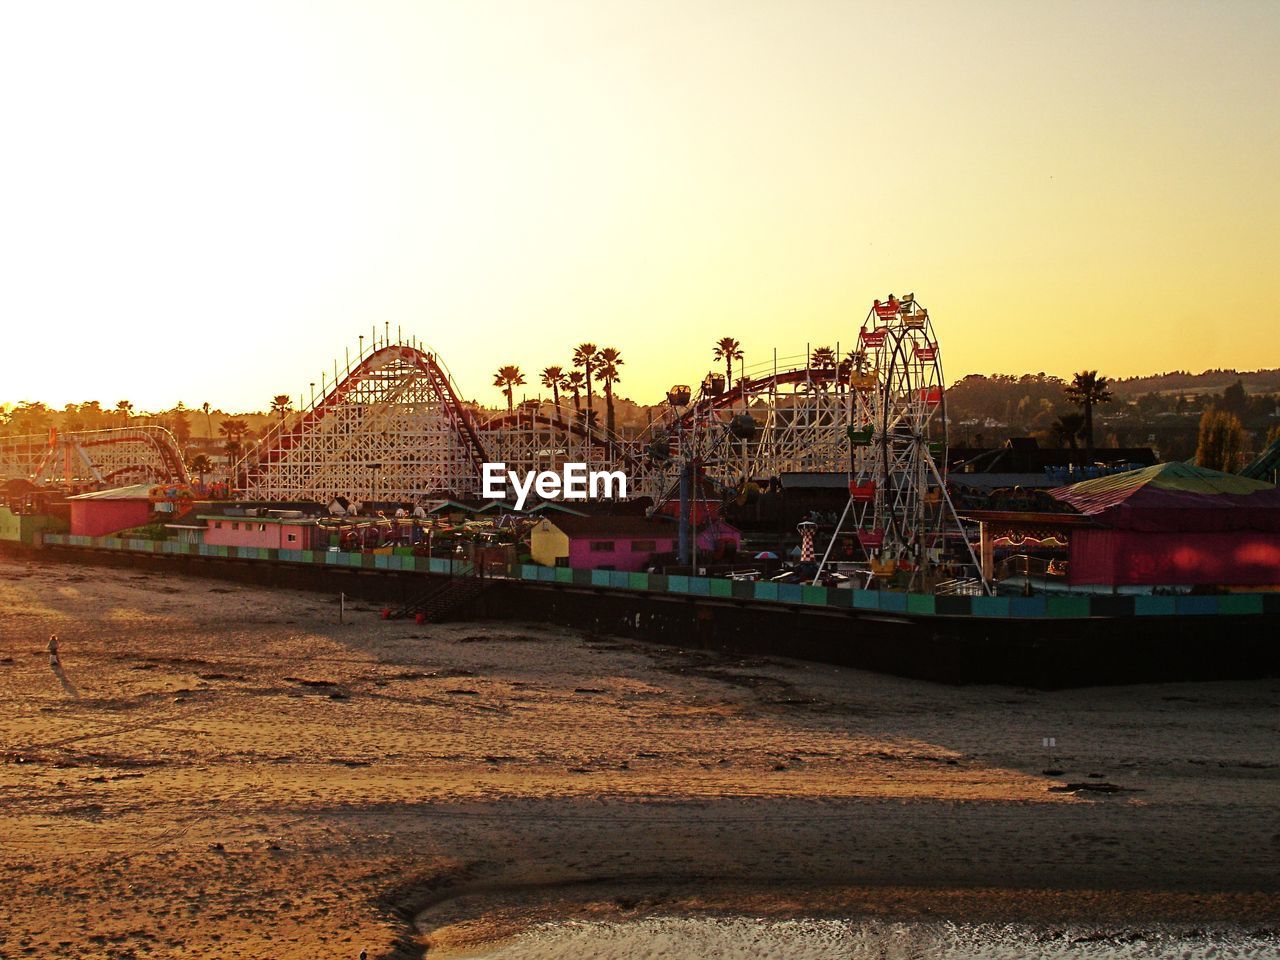 View of rides against clear sky at amusement park